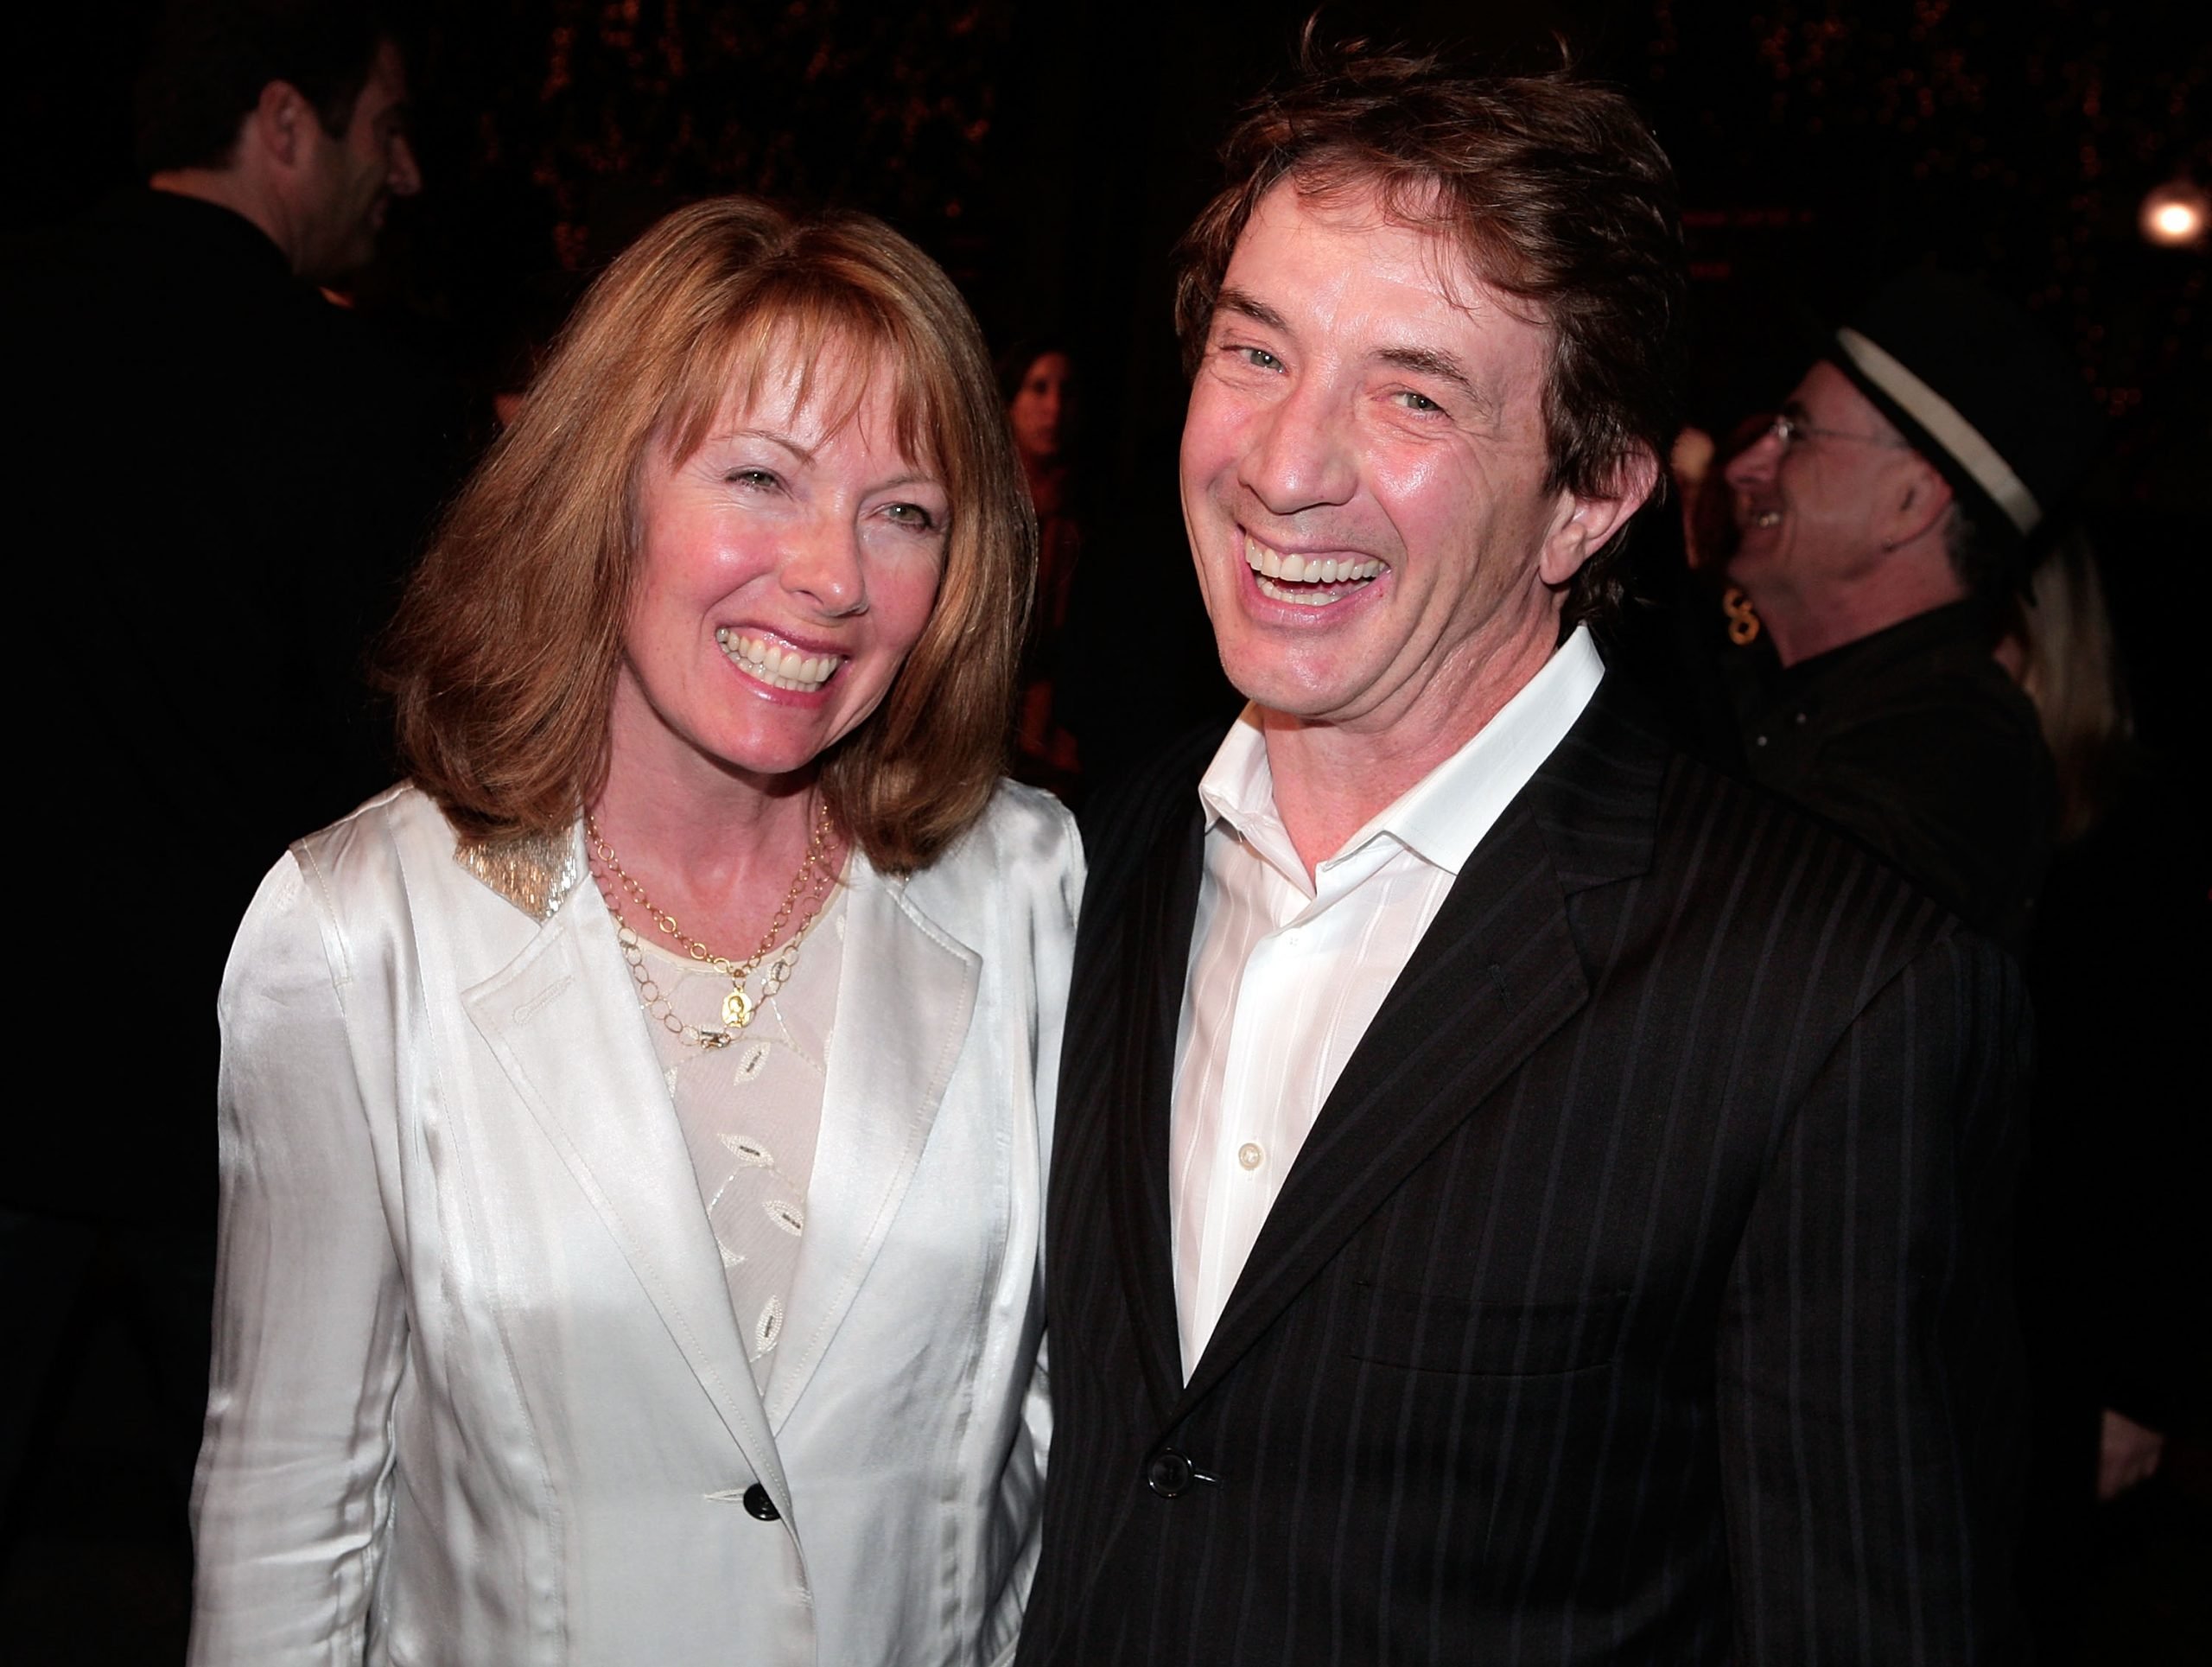 Martin Short and his late wife, Nancy Dolman, who battled ovarian cancer. (Getty Images)